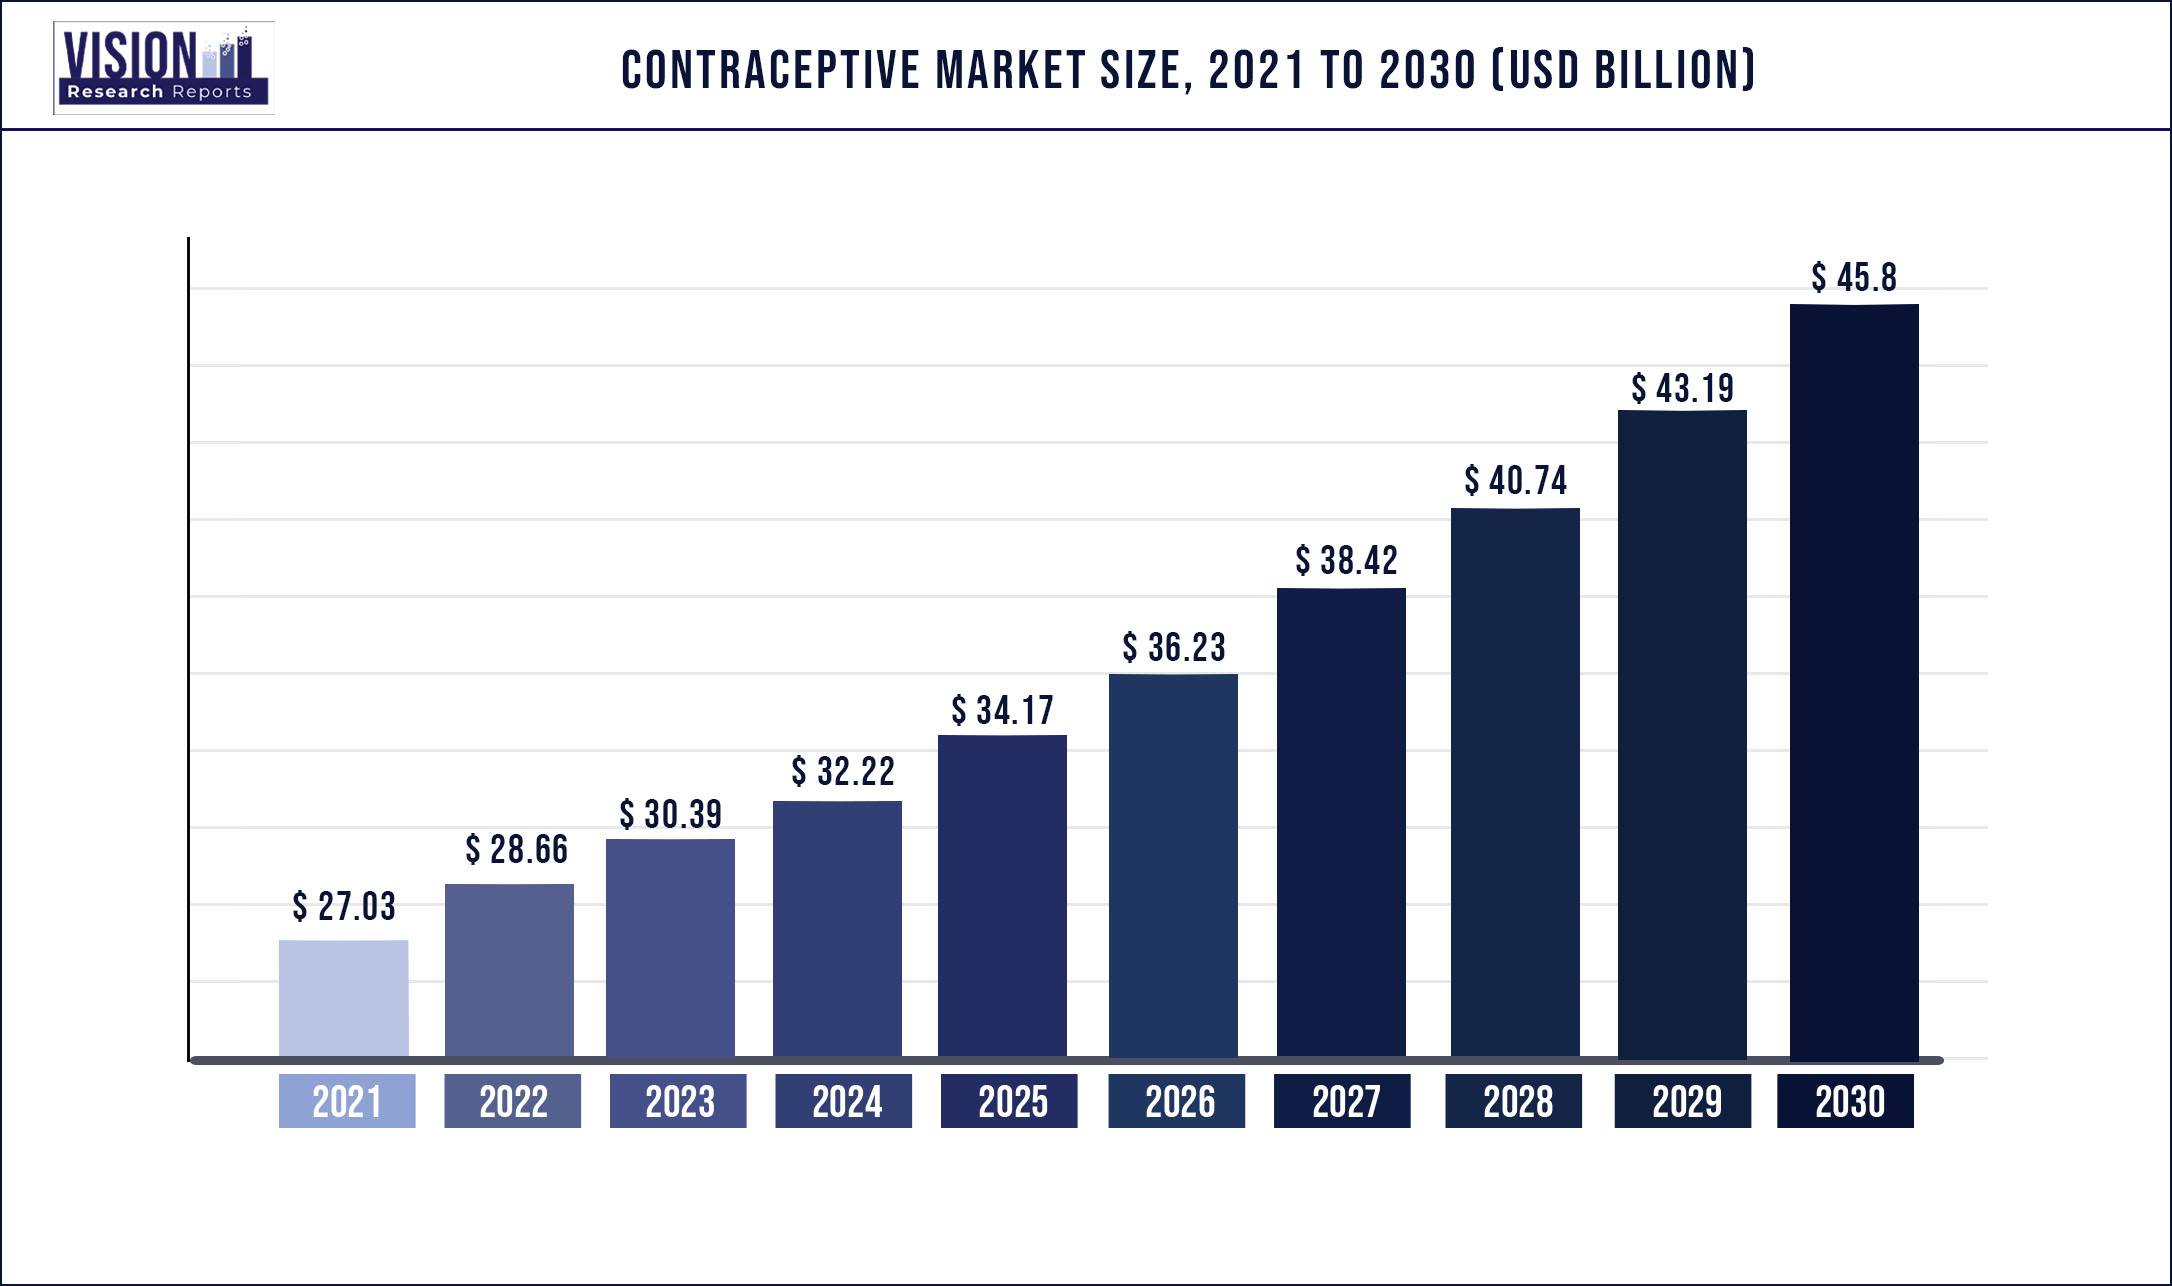 Contraceptive Market Size 2021 to 2030